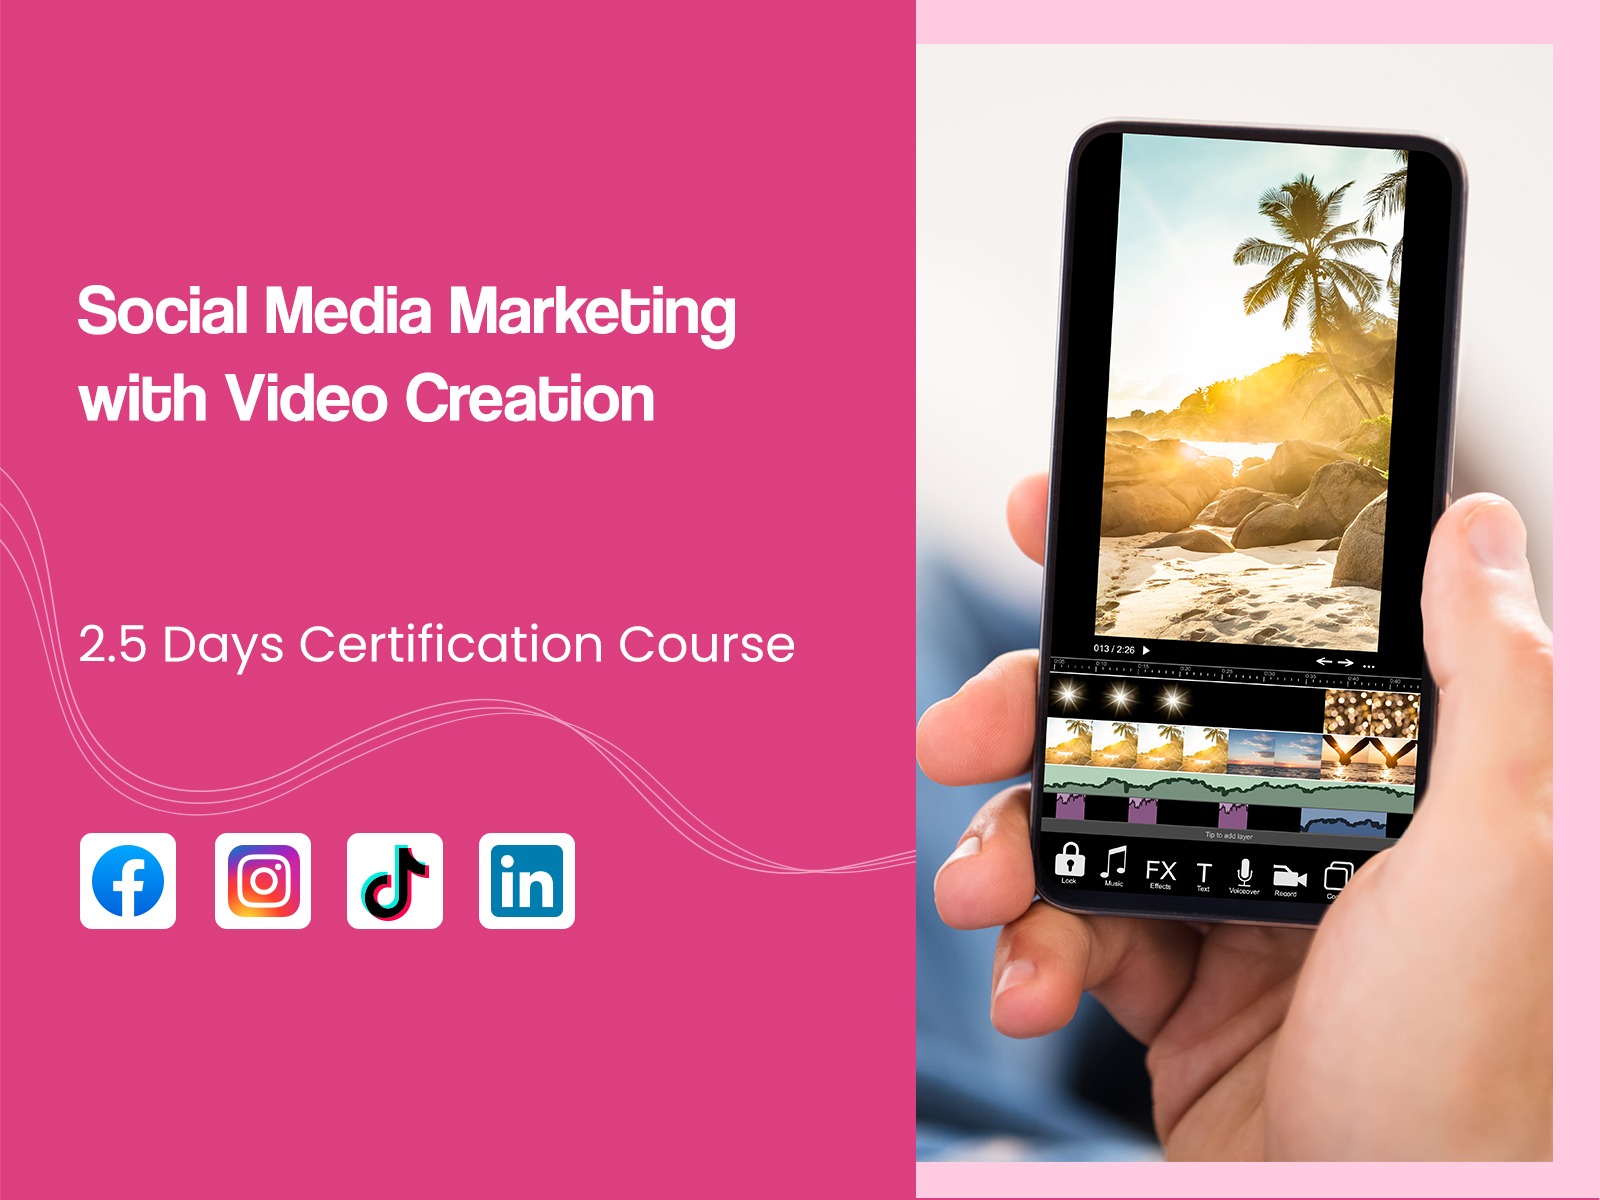 Social Media Marketing with Video Creation